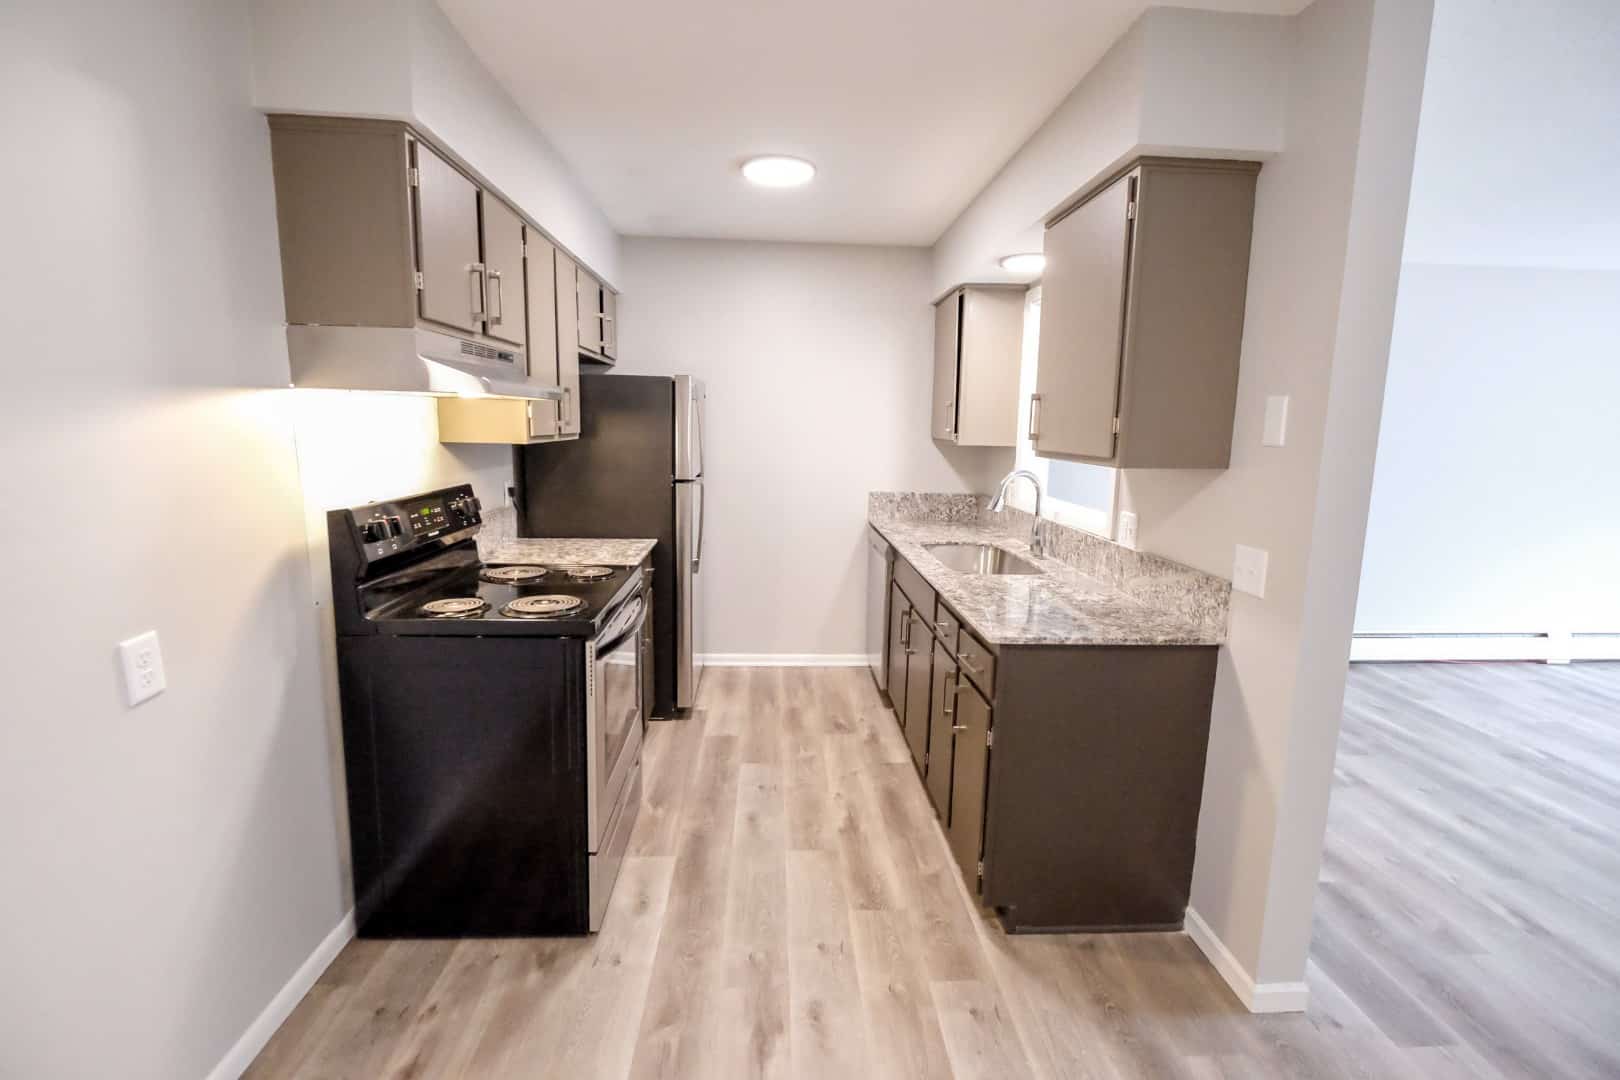 Kitchens equipped with granite countertops and wood flooring. 